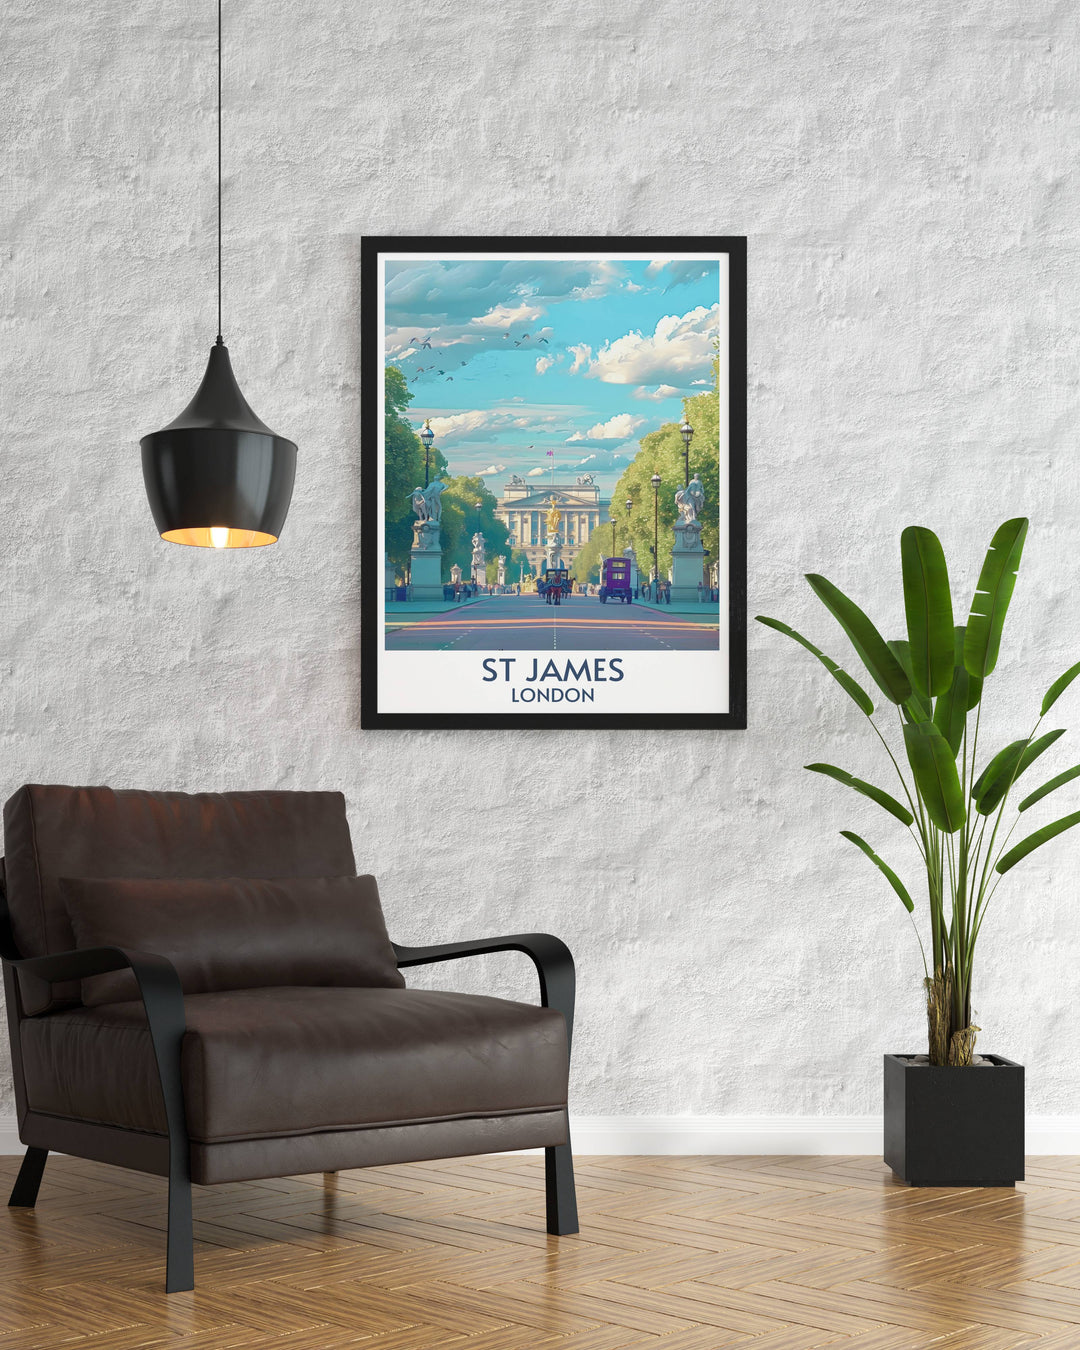 Bring the majesty of Buckingham Palace and the lush greenery of St Jamess Park into your home with this elegant wall art.